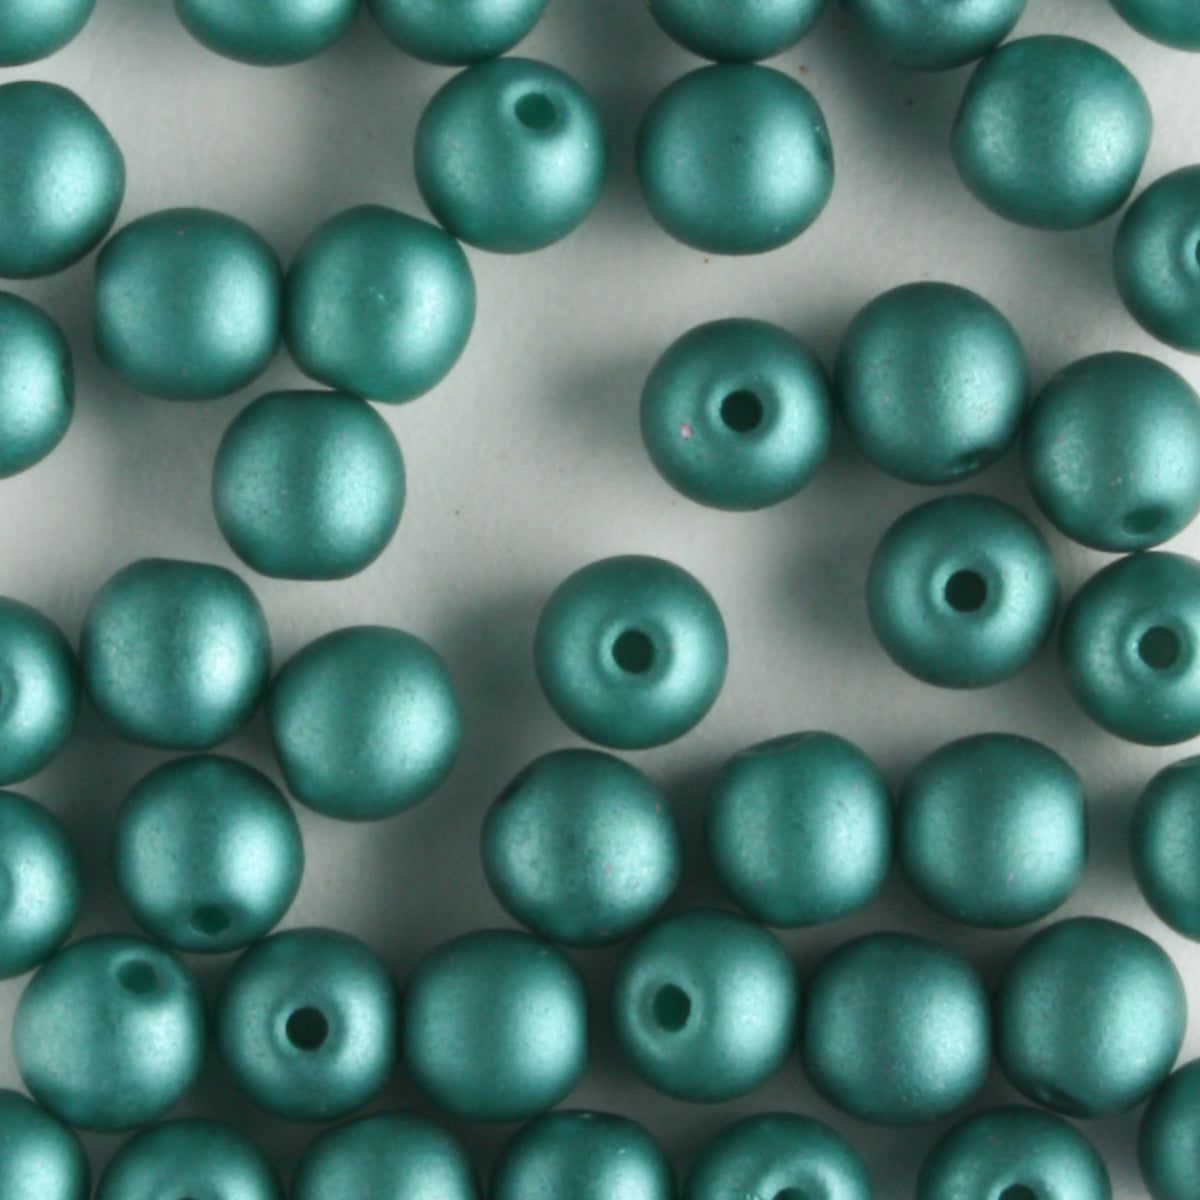 4mm Round Glass Pearls Matte Teal - 100 beads